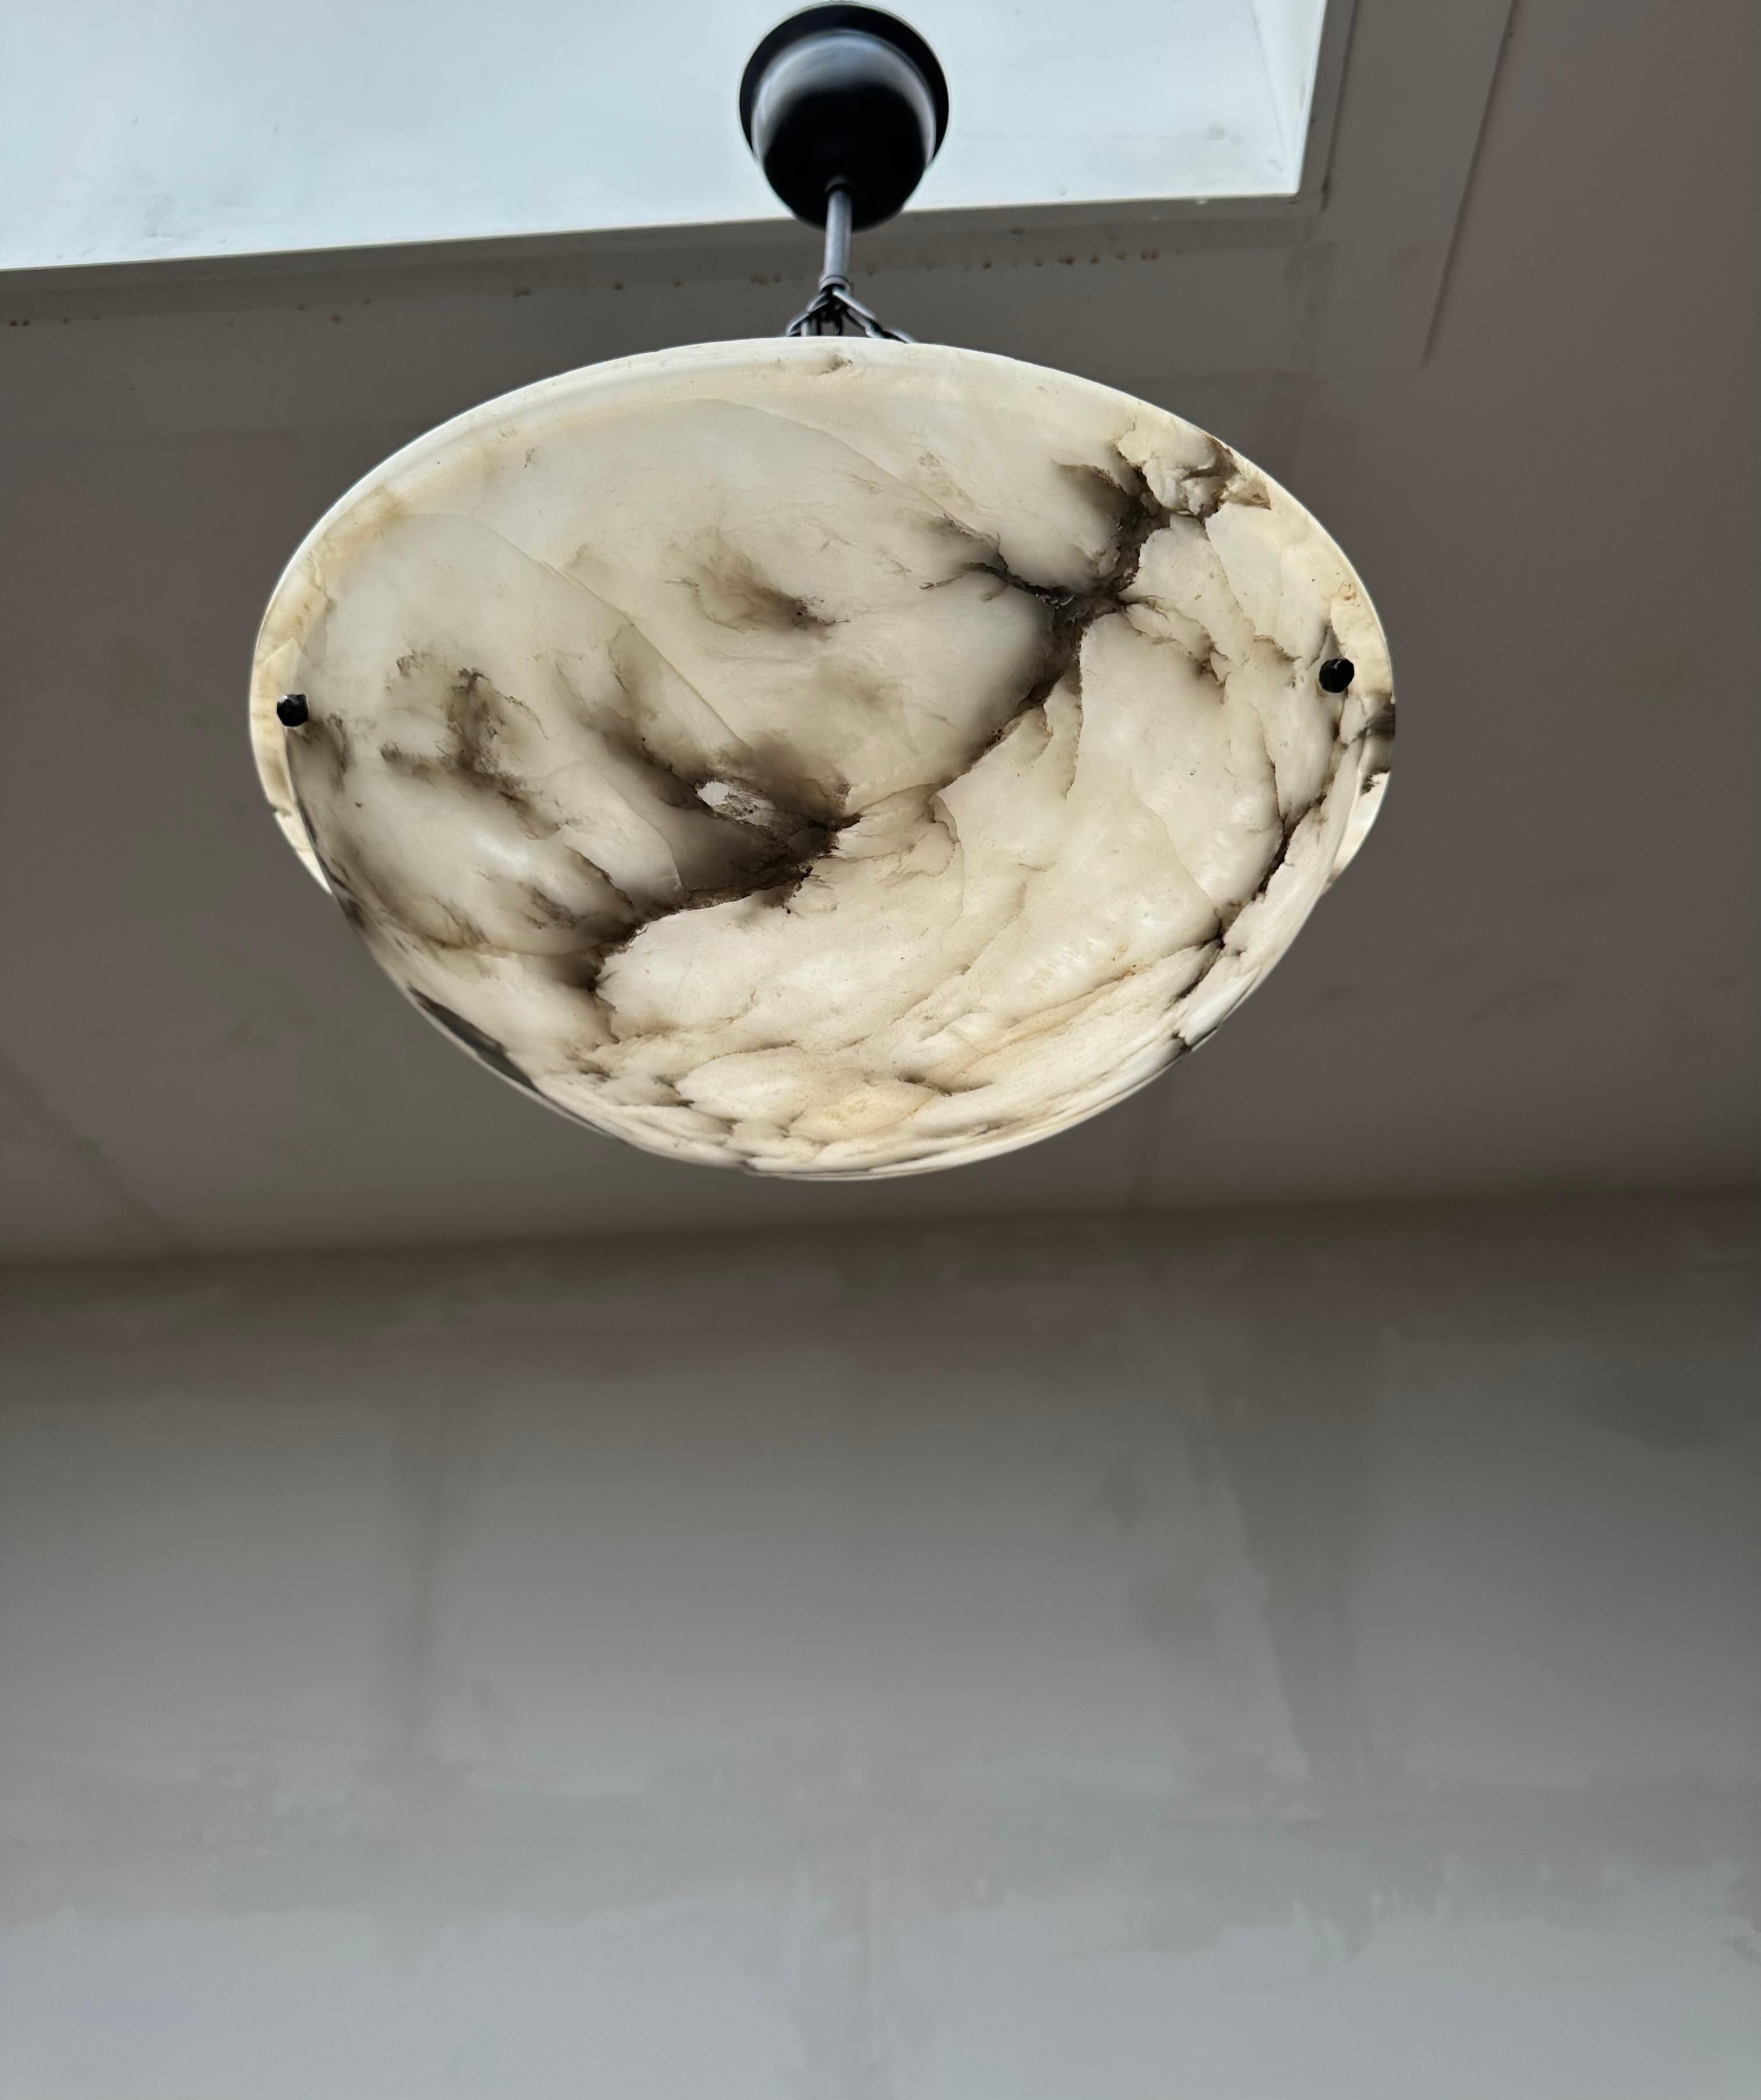 Marvelous antique light fixture for an entry hall, bedroom or any other small room.

With early 20th century light fixtures being one of our specialities, we always love finding timeless alabaster pendants. This particular work of beauty comes with